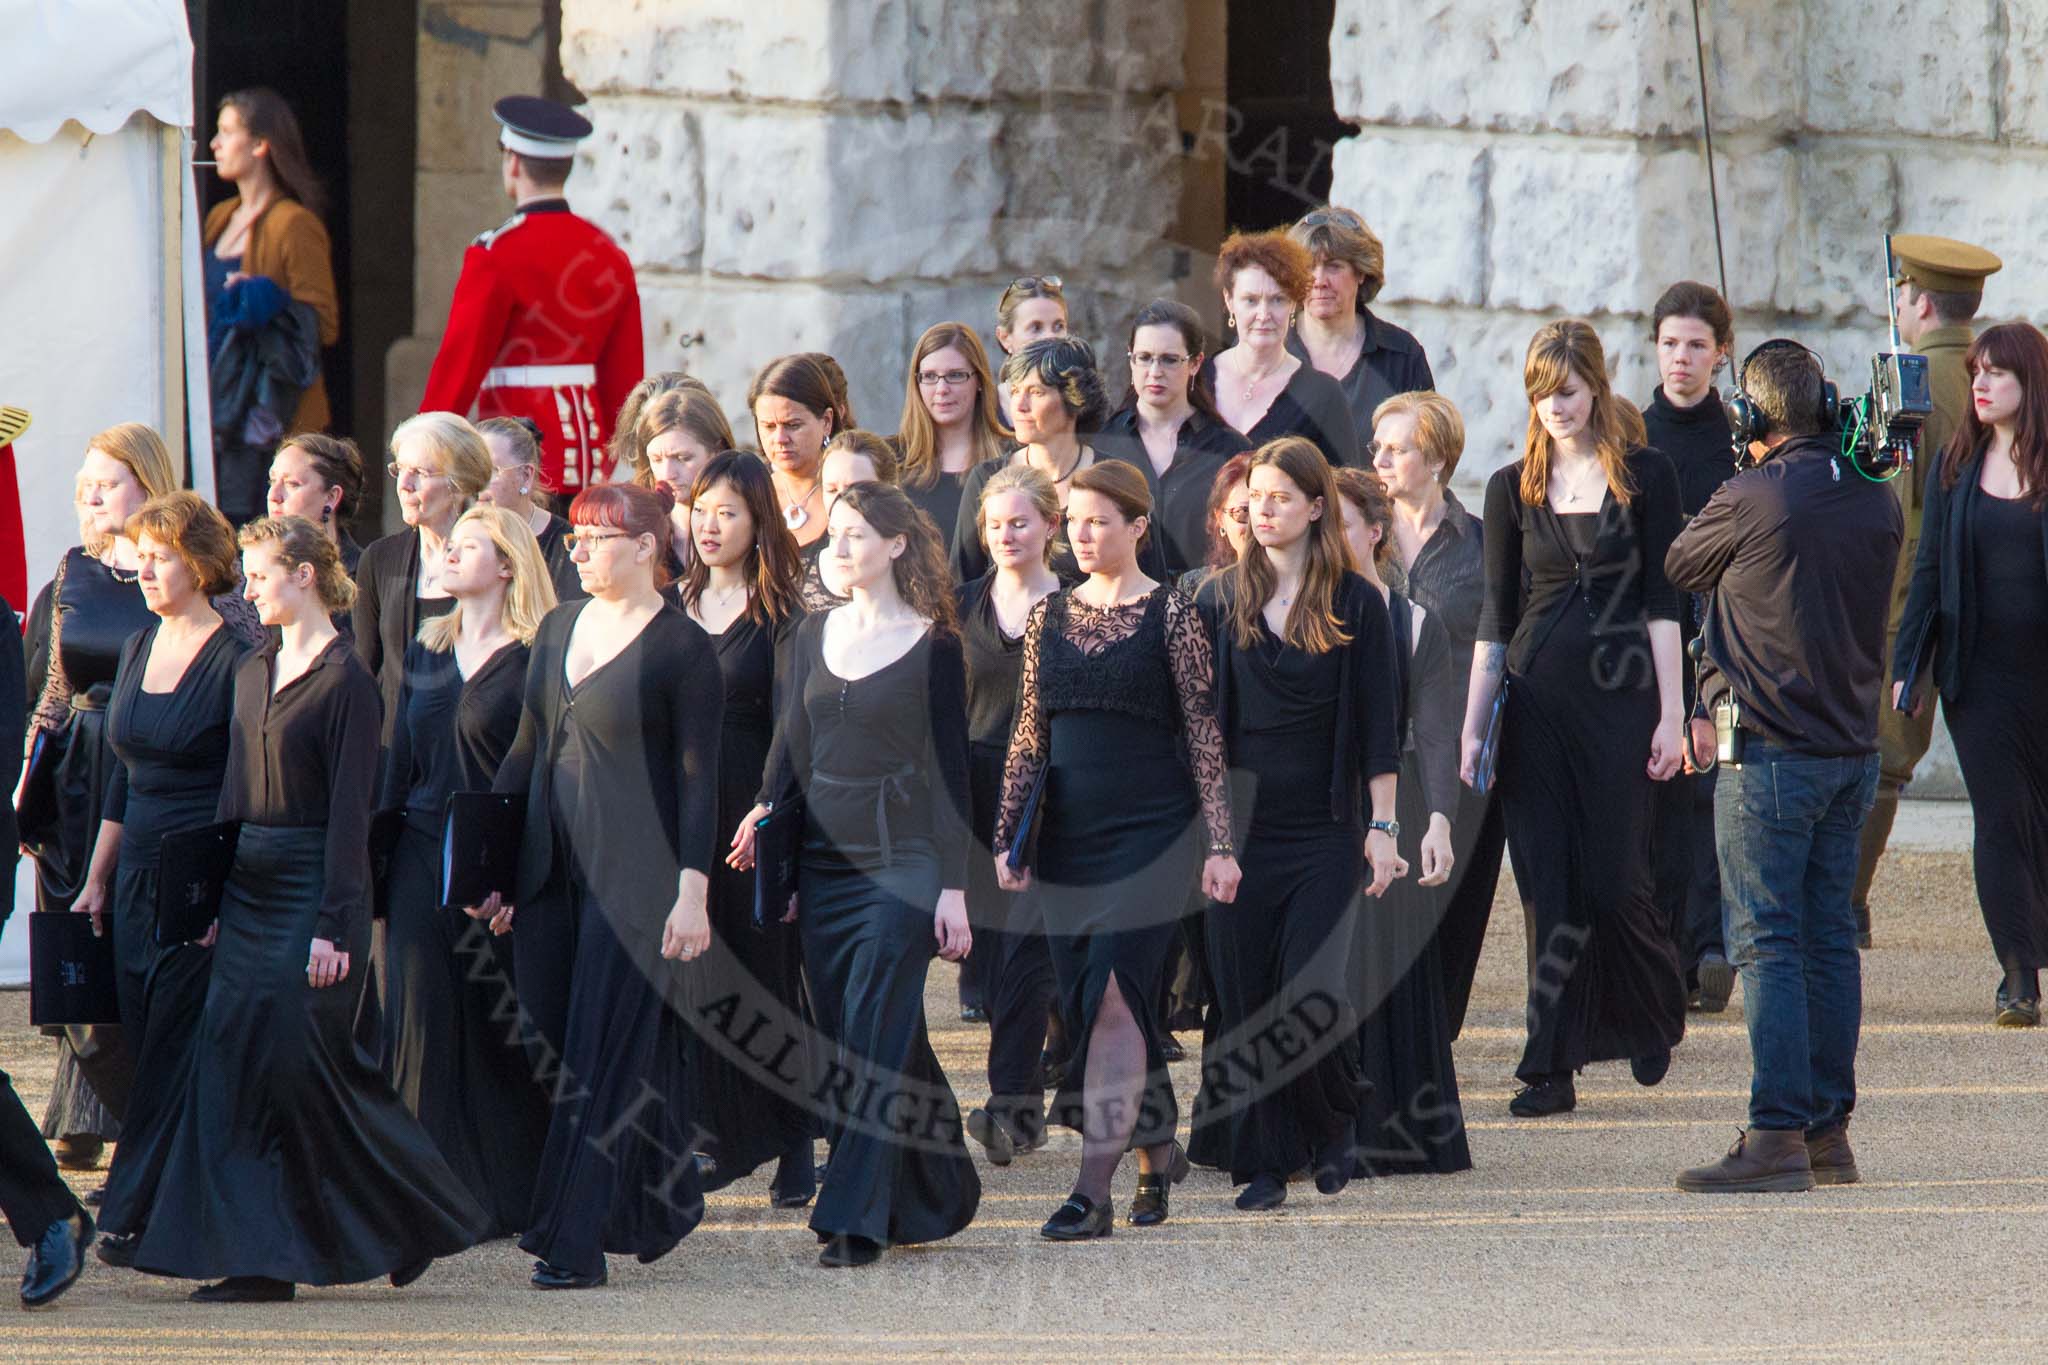 Beating Retreat 2014.
Horse Guards Parade, Westminster,
London SW1A,

United Kingdom,
on 11 June 2014 at 20:21, image #88